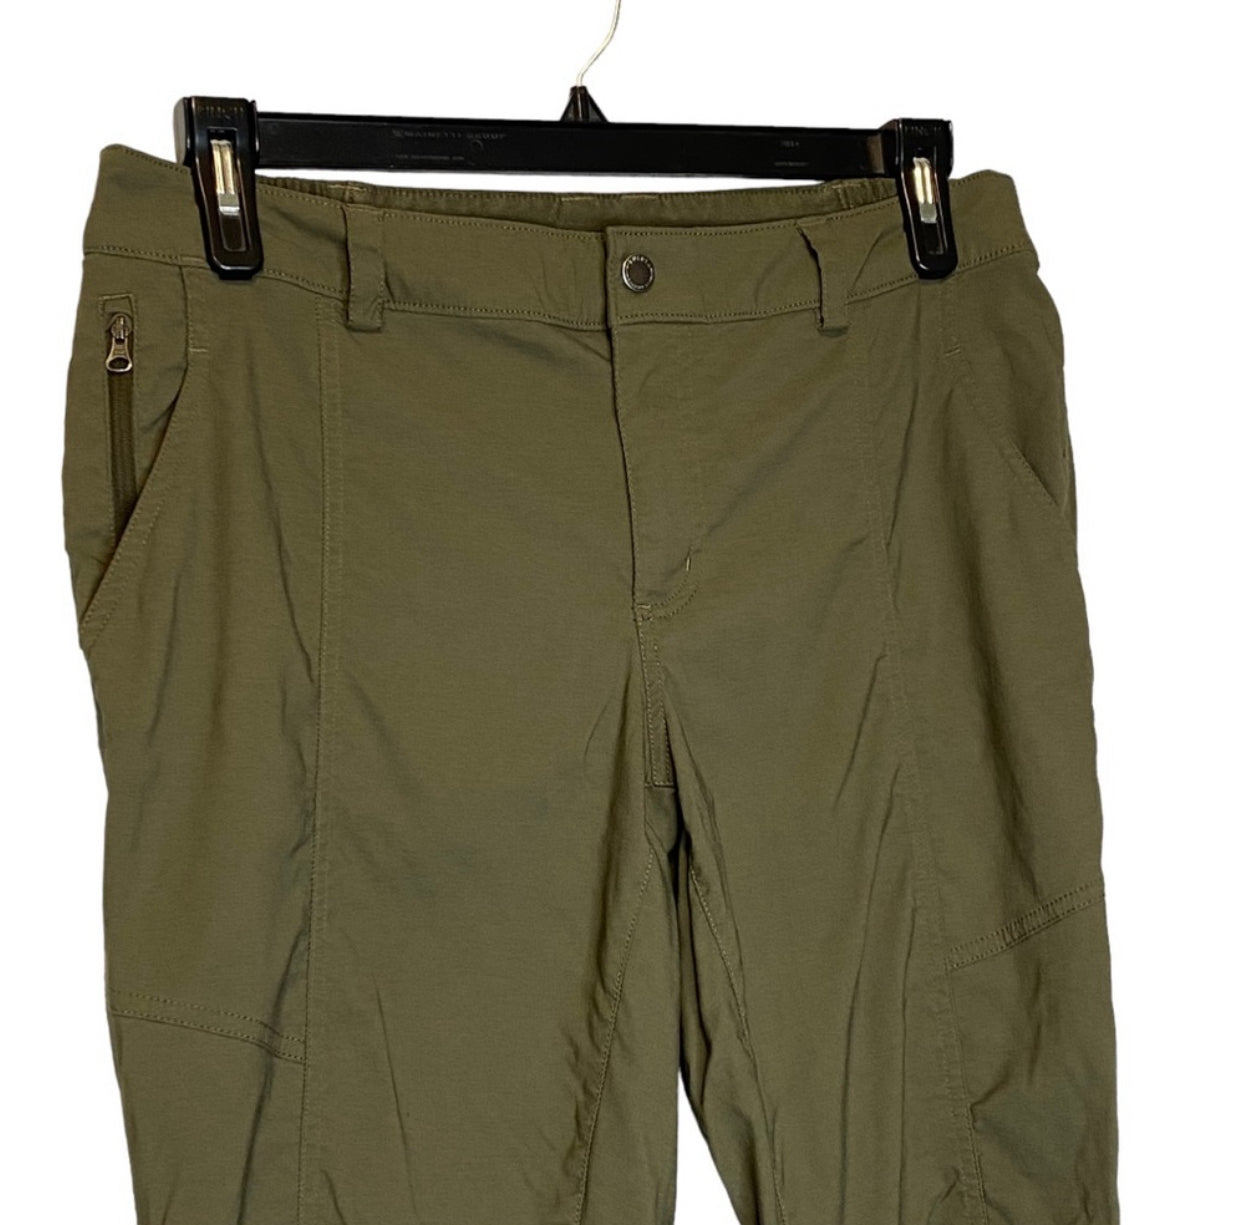 Duluth Trading Co Dry on the Fly Slim Leg Pants - Size 12